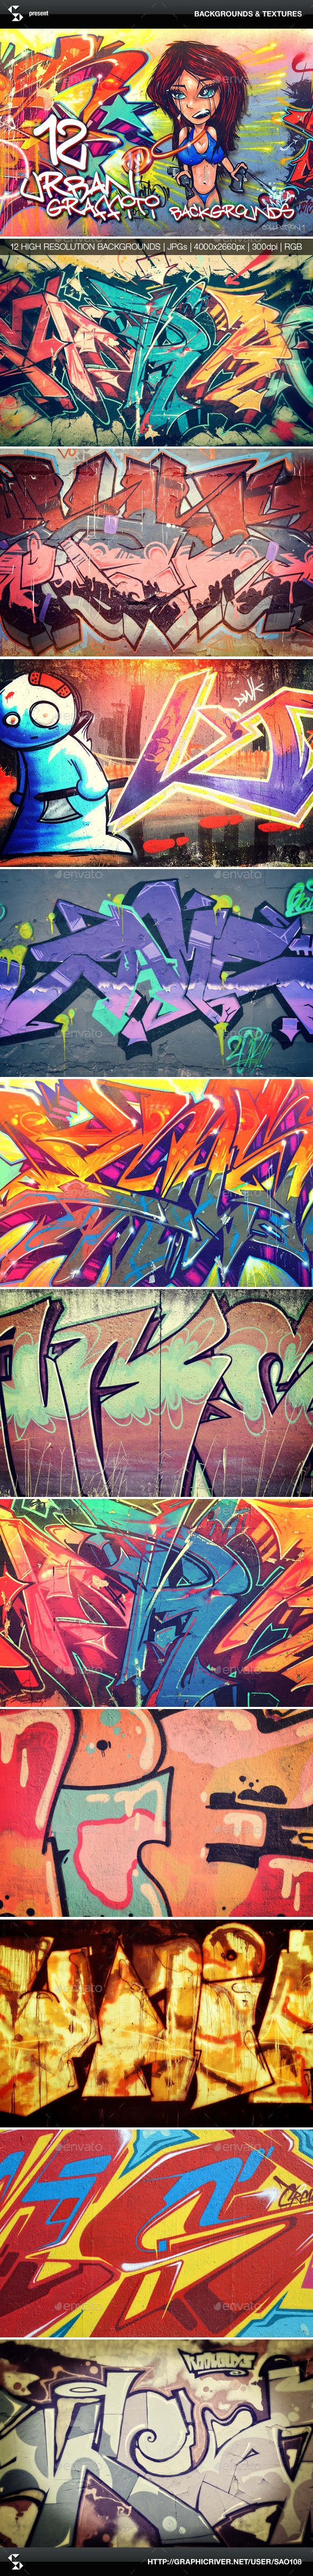 Urban Graffiti Backgrounds - Collection 1